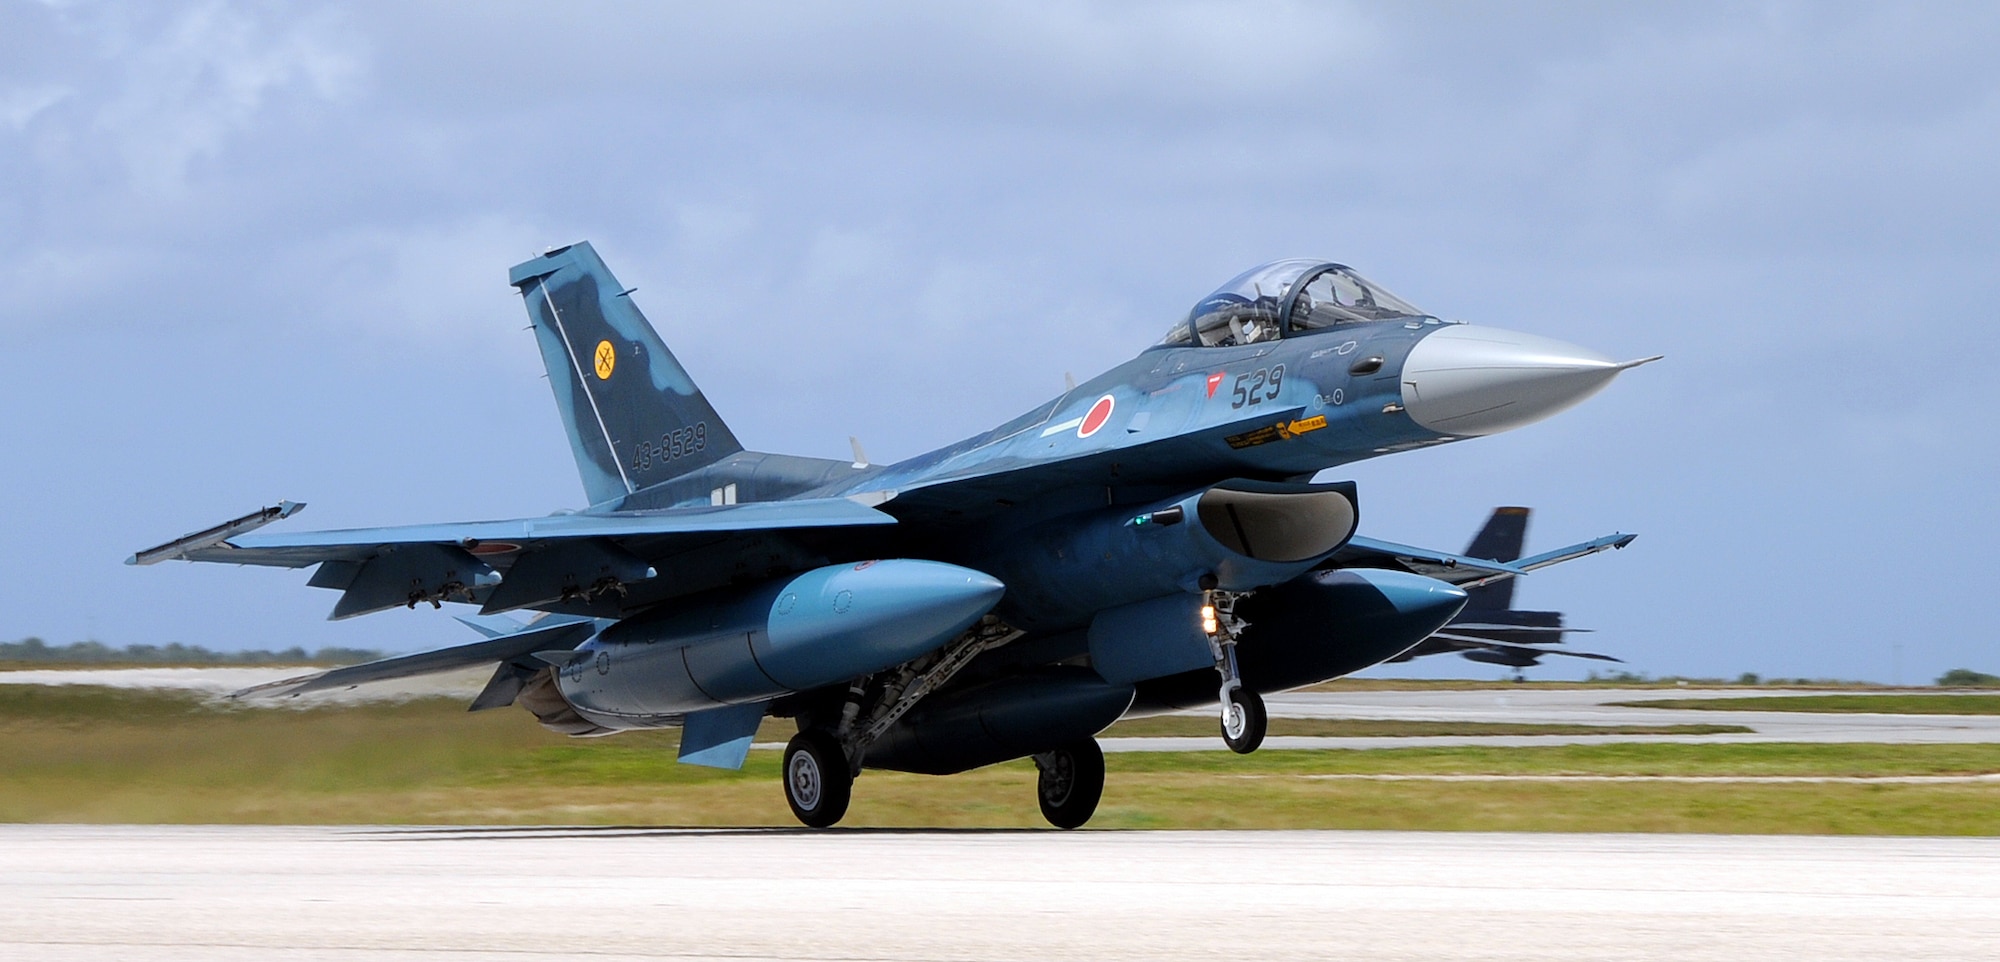 ANDERSEN AIR FORCE BASE, Guam - A Japan Air Self Defense Force F-2 fighter lands here Jan. 30 to participate in the two-week Cope North exercise. The Japanese F-2 single-engine fighter has performance capabilities roughly comparable to those of the U.S. F-16. (U.S. Air Force photo by Airman 1st Class Courtney Witt)
